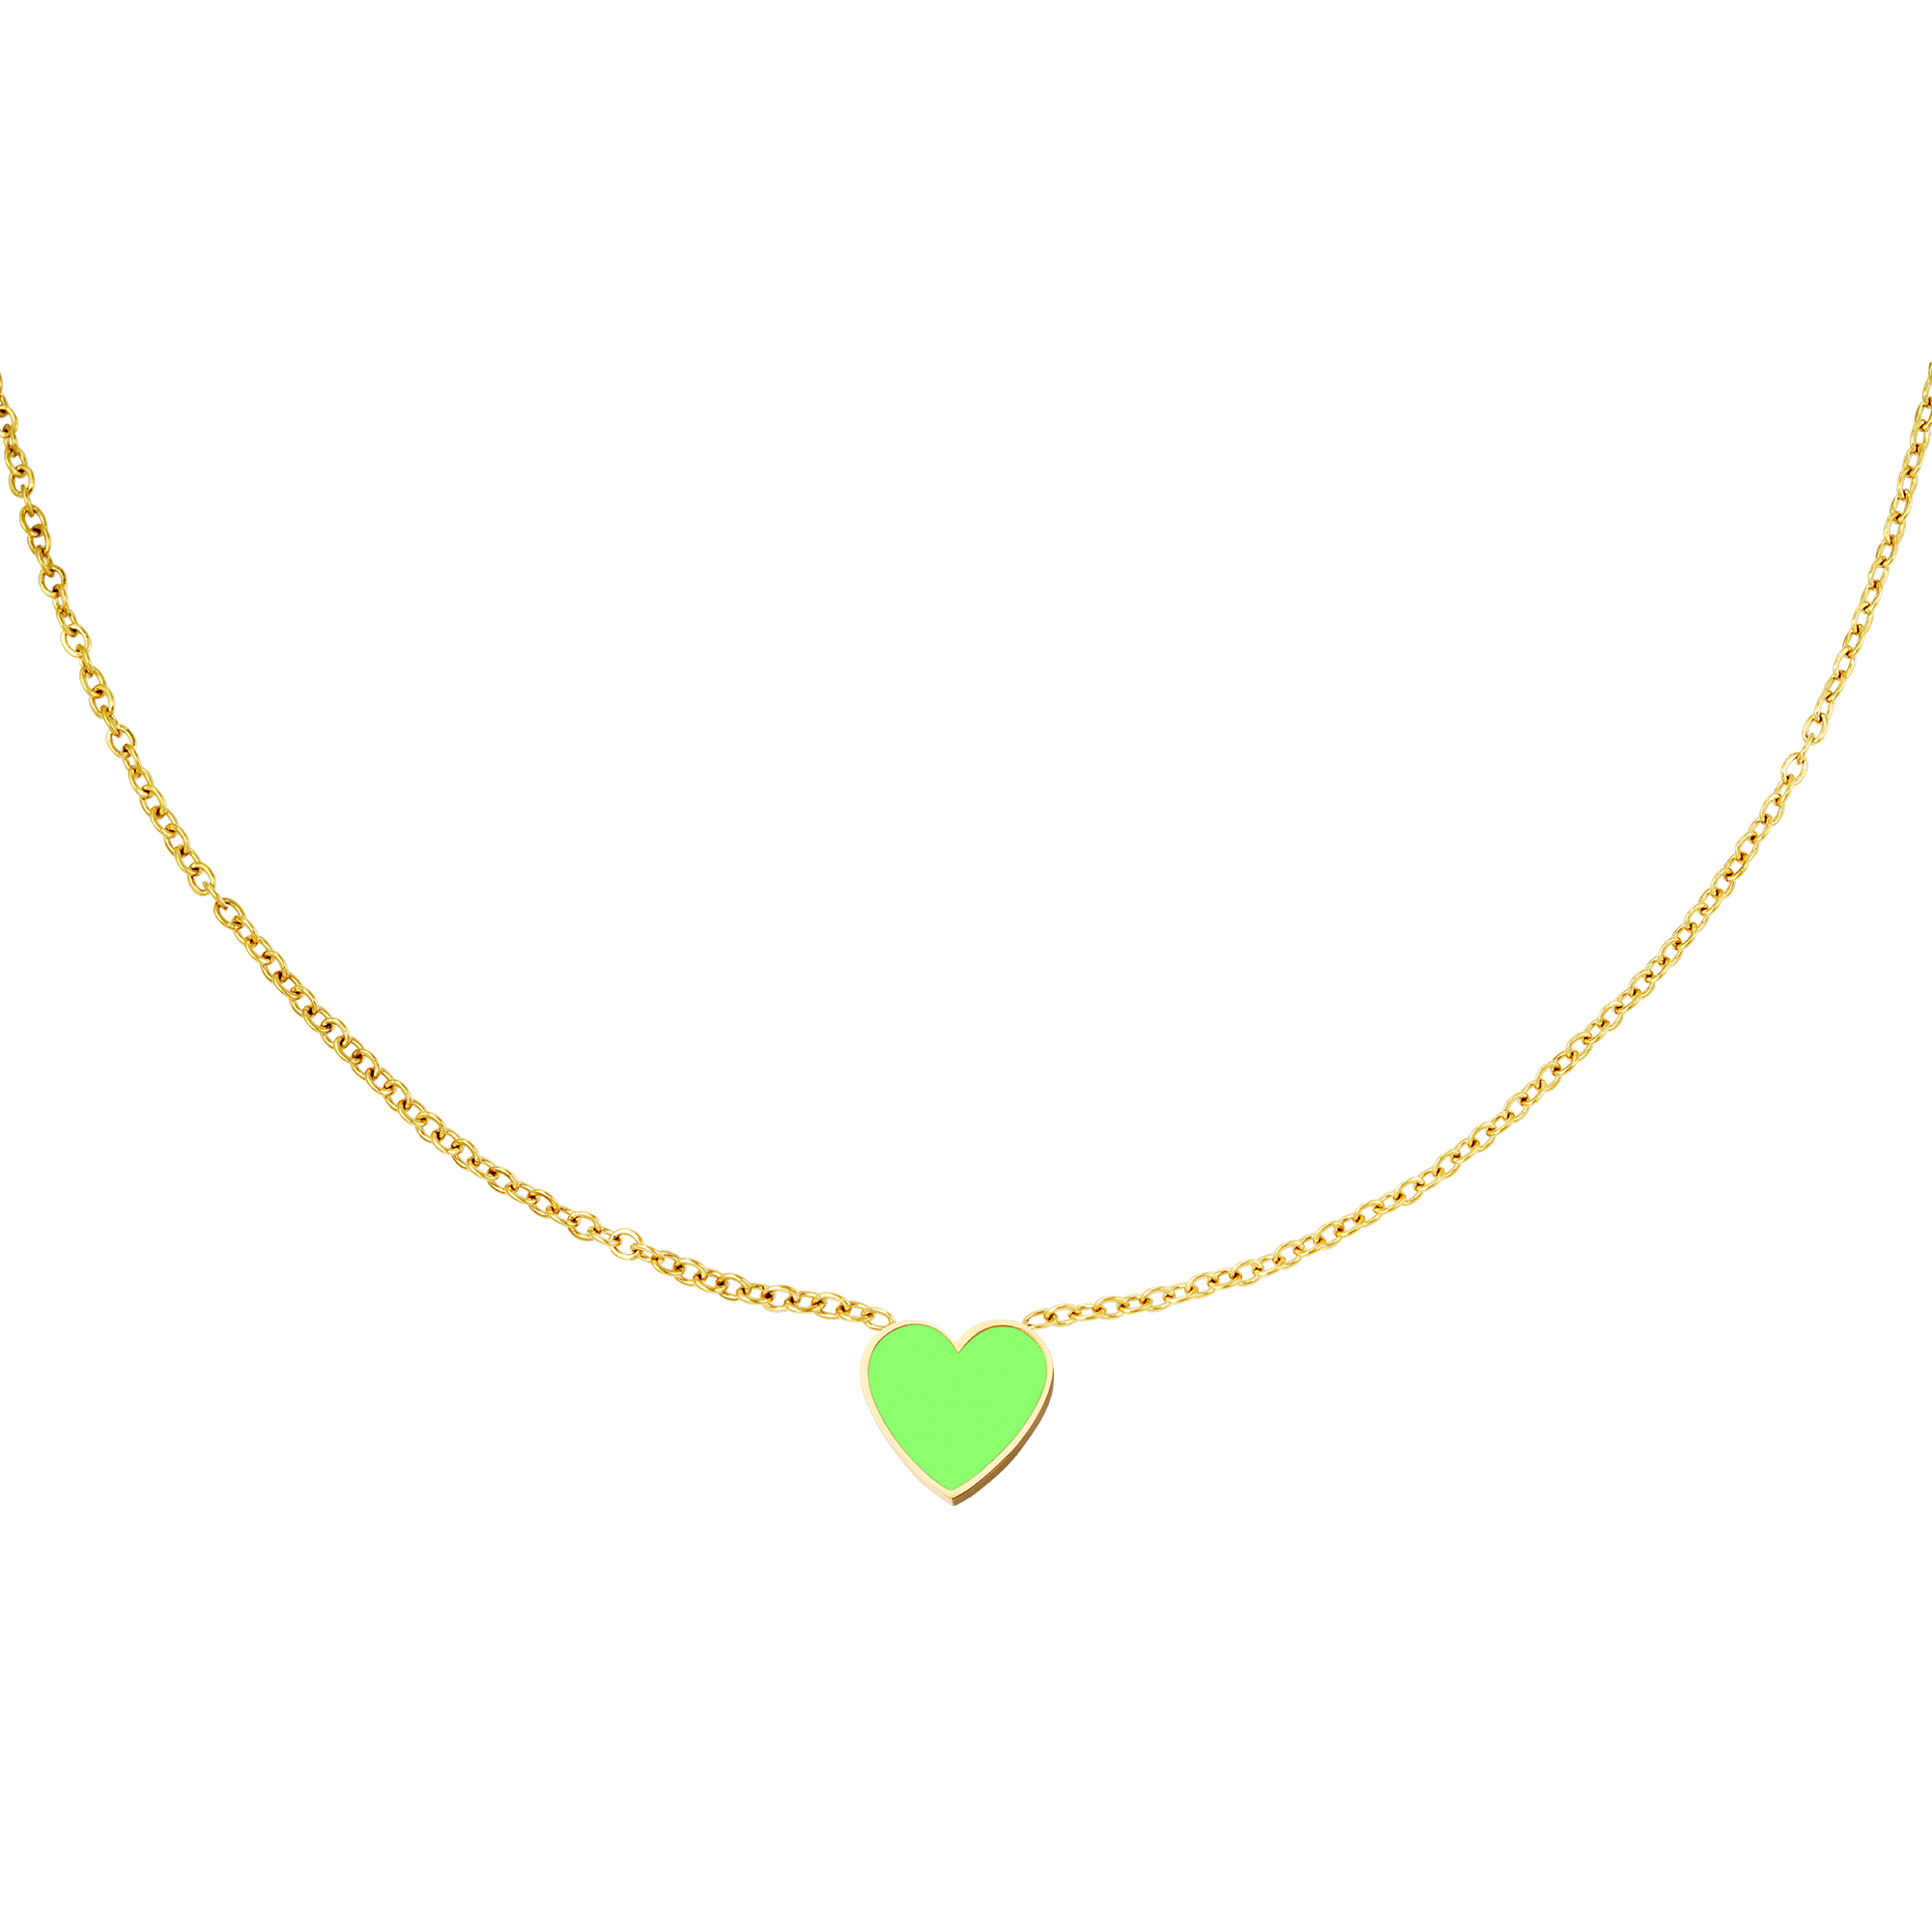 Stainless steel necklace with colorful heart charm